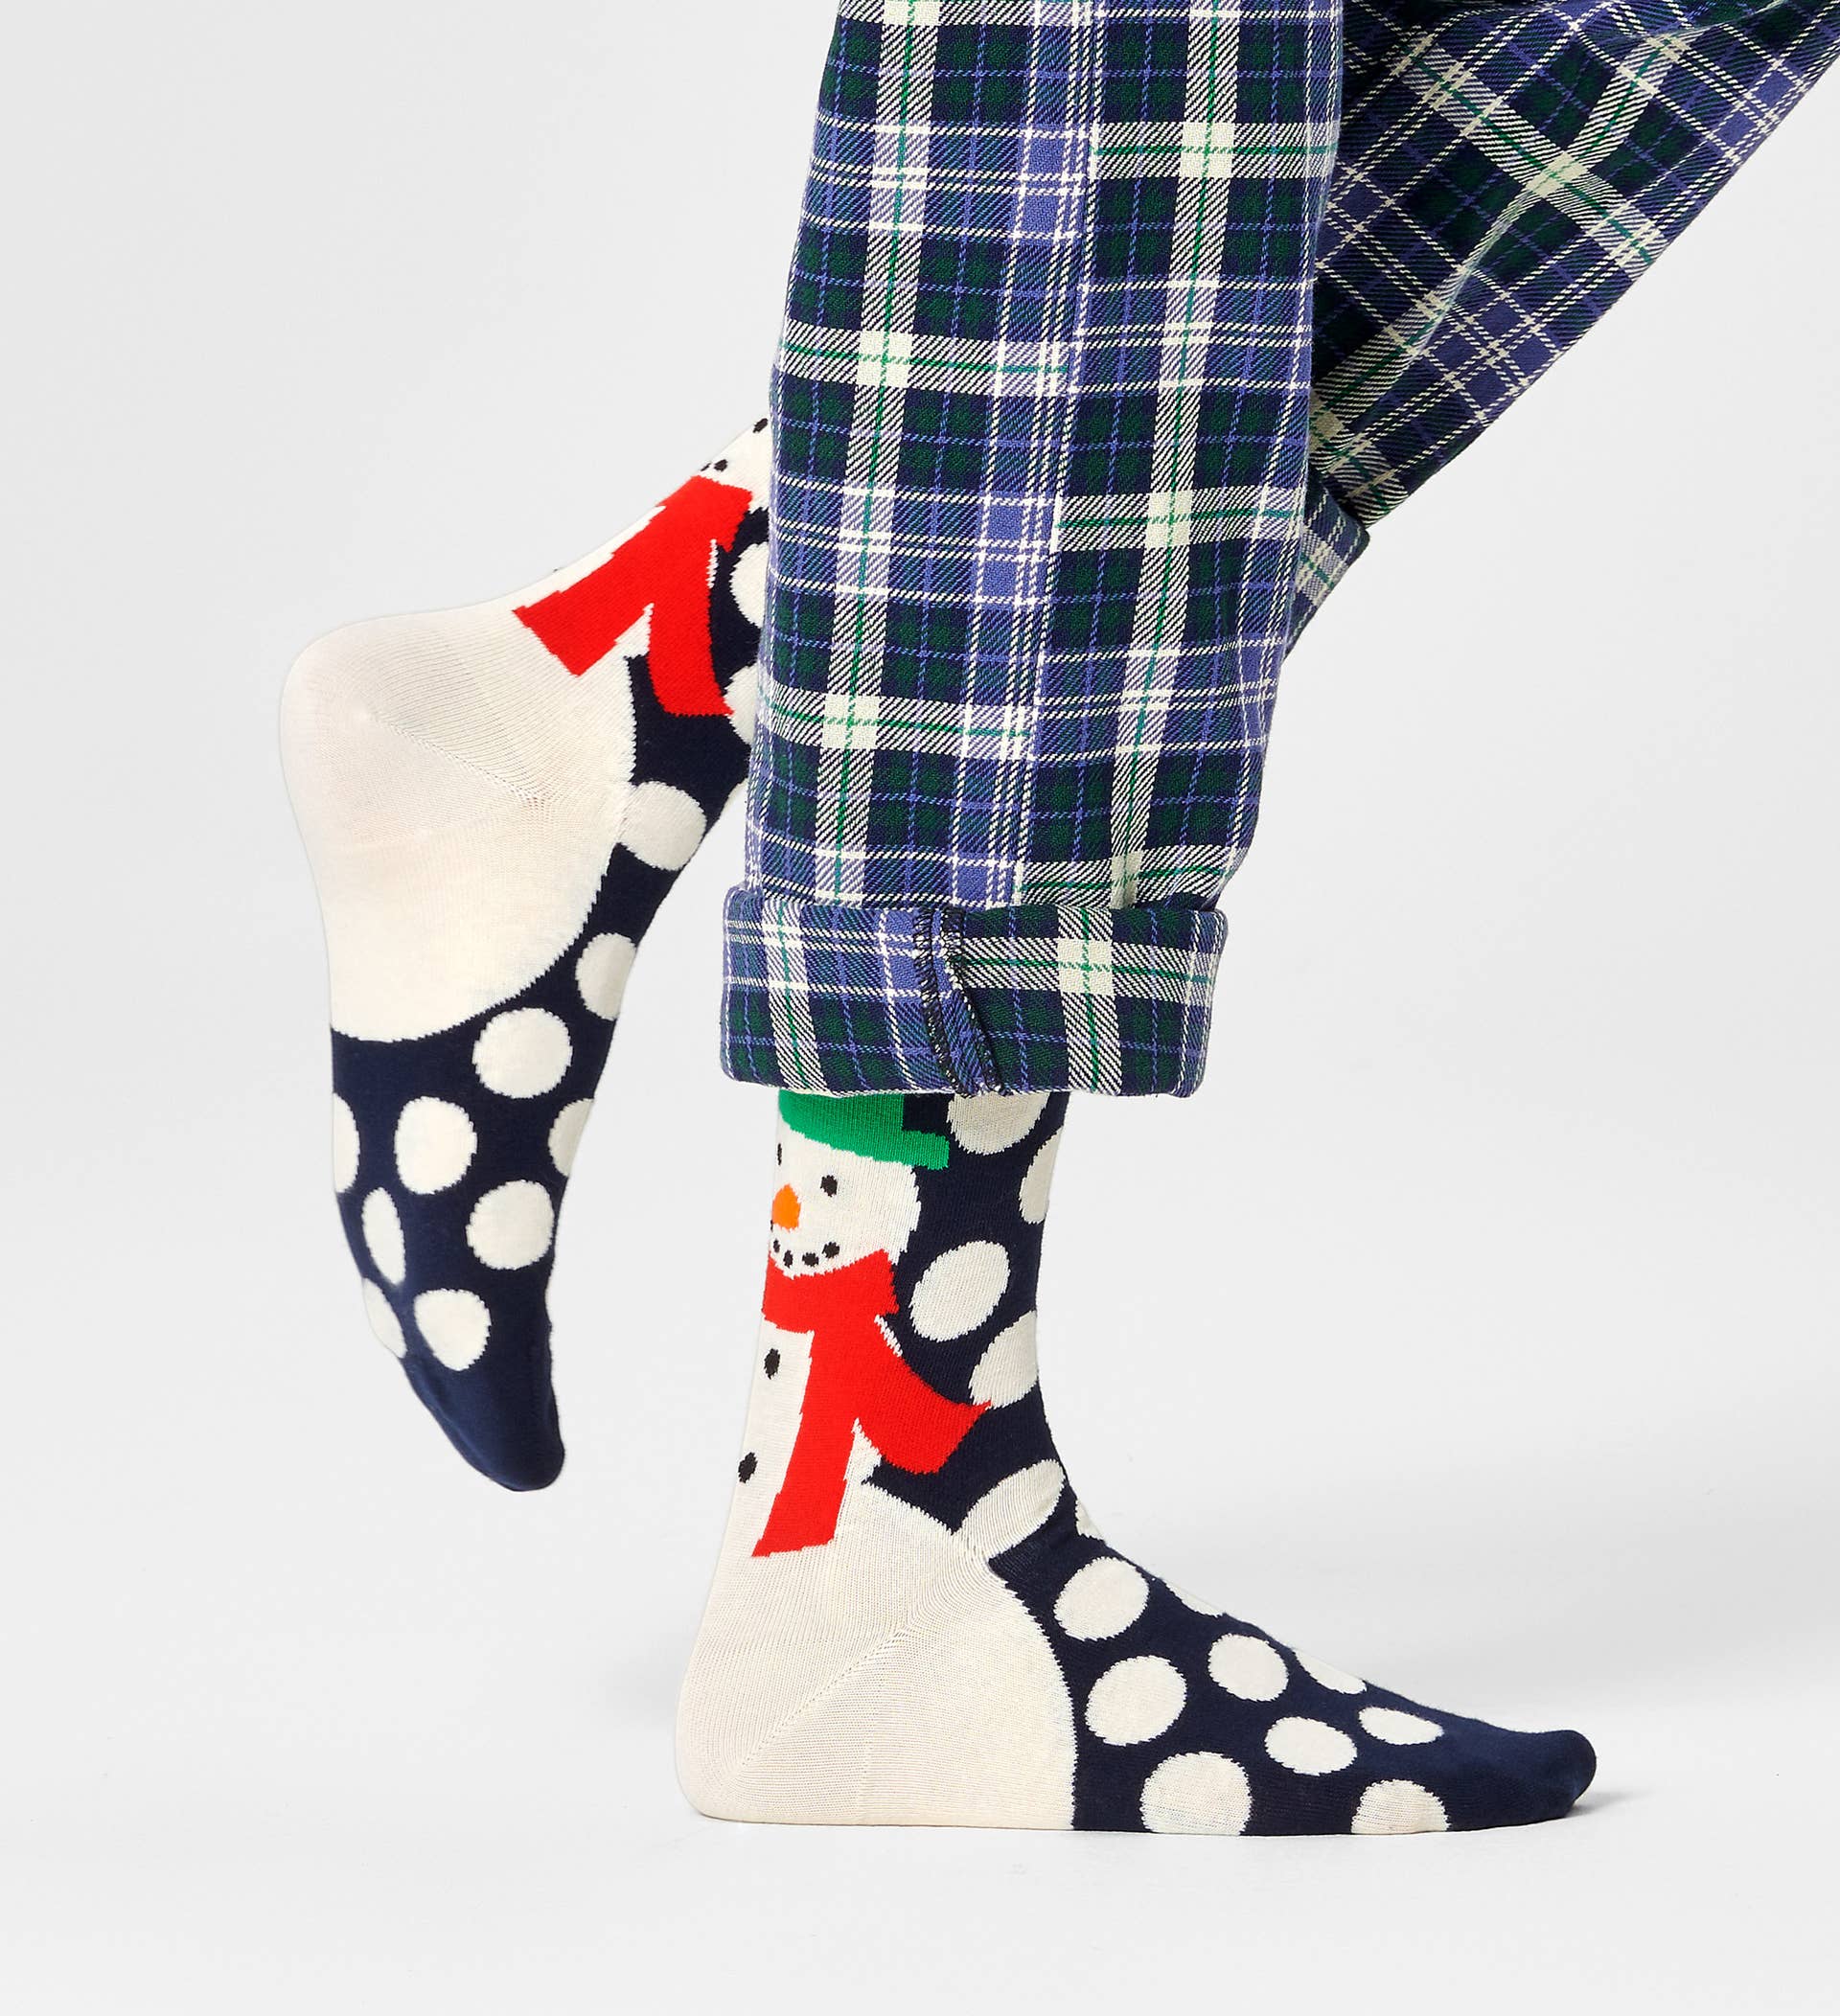 Happy Socks JSS-6500 Jumbo Snowman Sock - Navy organic cotton ankle socks with a hat and scarf wearing snowman on the back and white polka dots pattern.